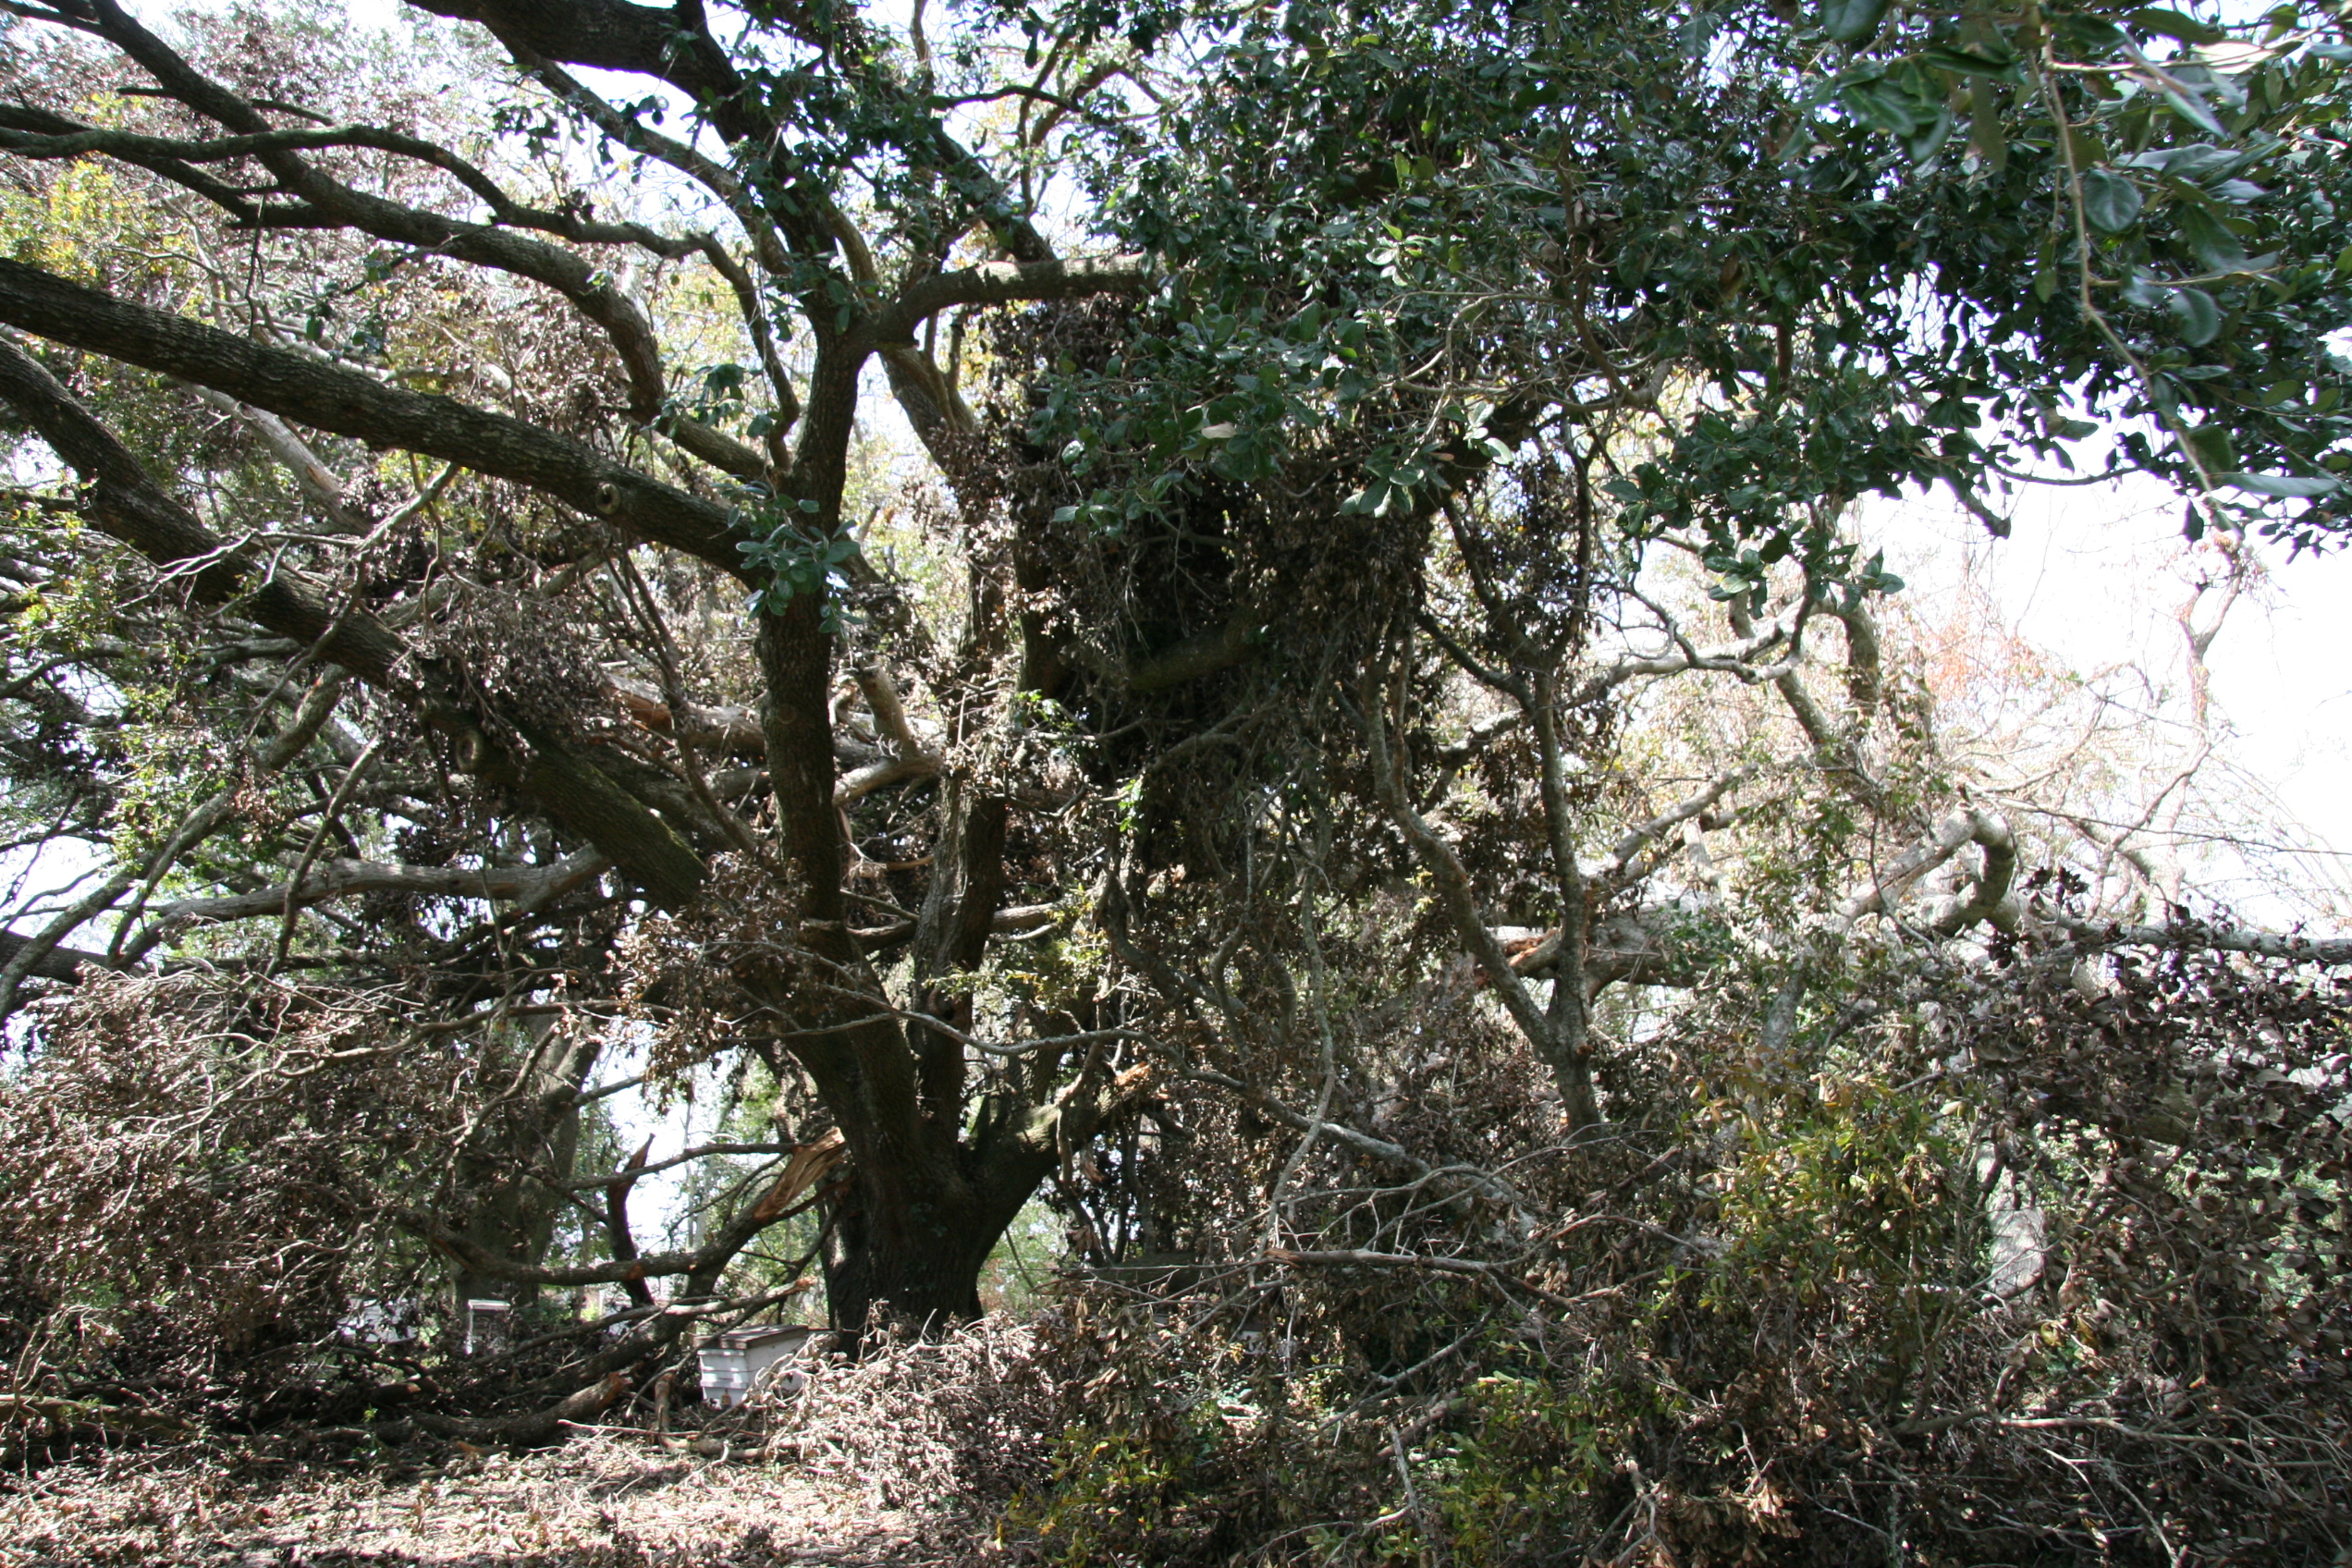 Hurricane Gustav: Live oak protected the colonies, but what a mess!!!